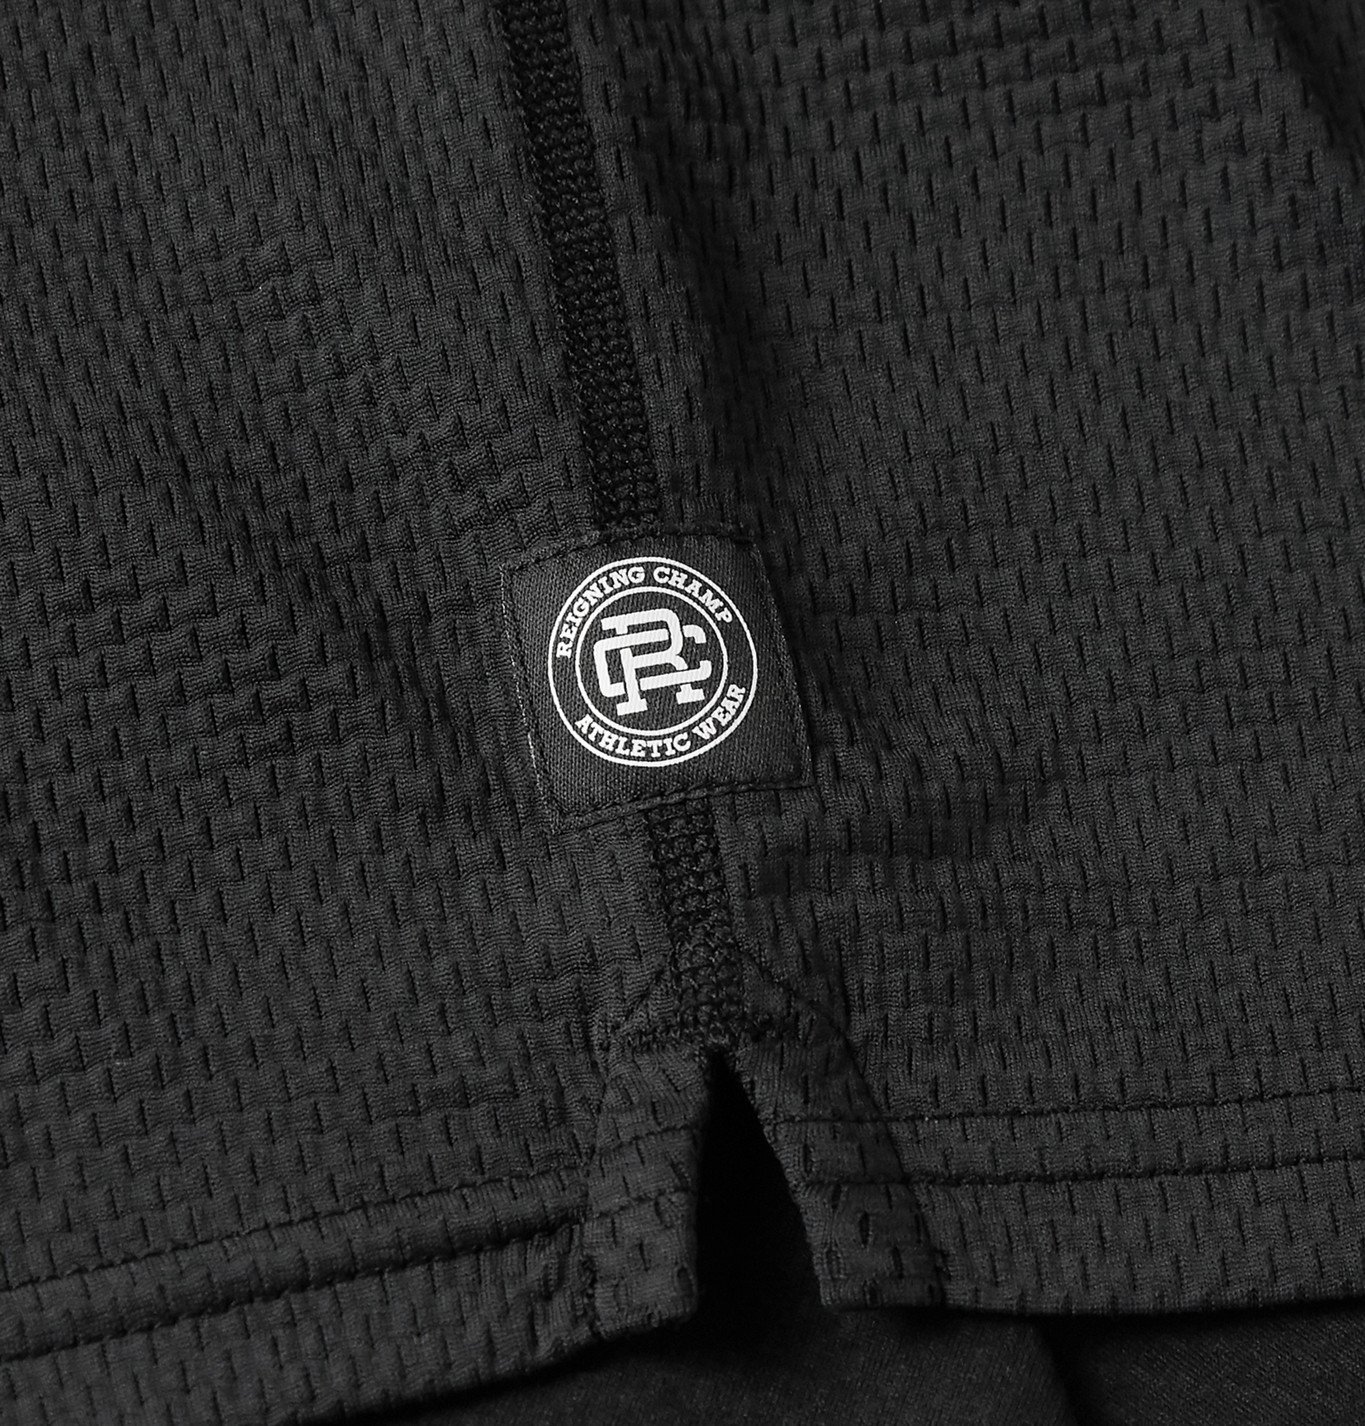 Reigning Champ - SOLOTEX Polo Shirt - Black Reigning Champ